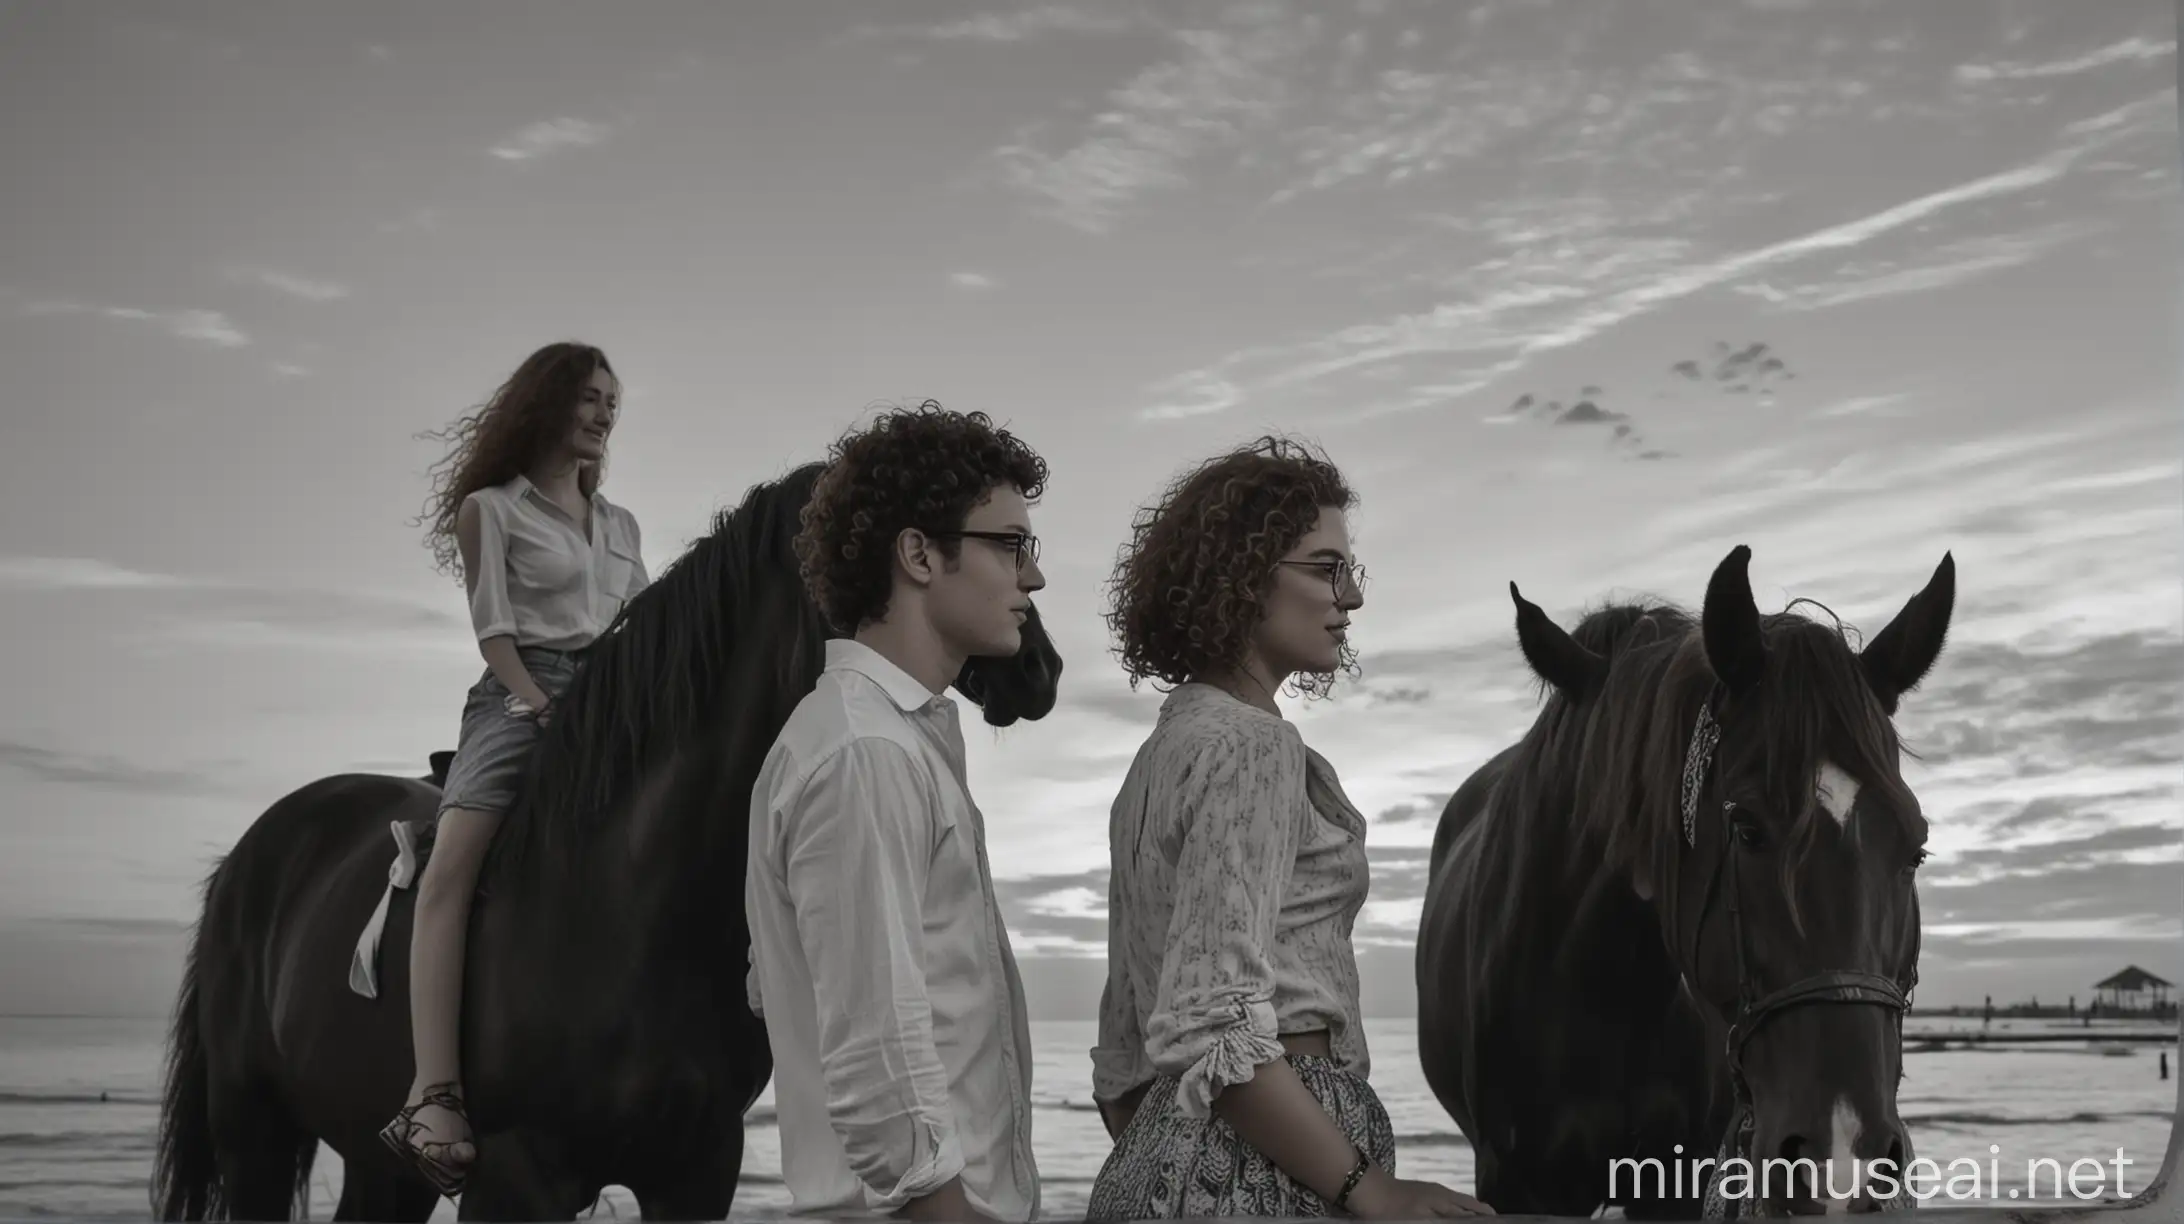 Young Couple Riding Black and White Horses at Sunset on Exotic Beach